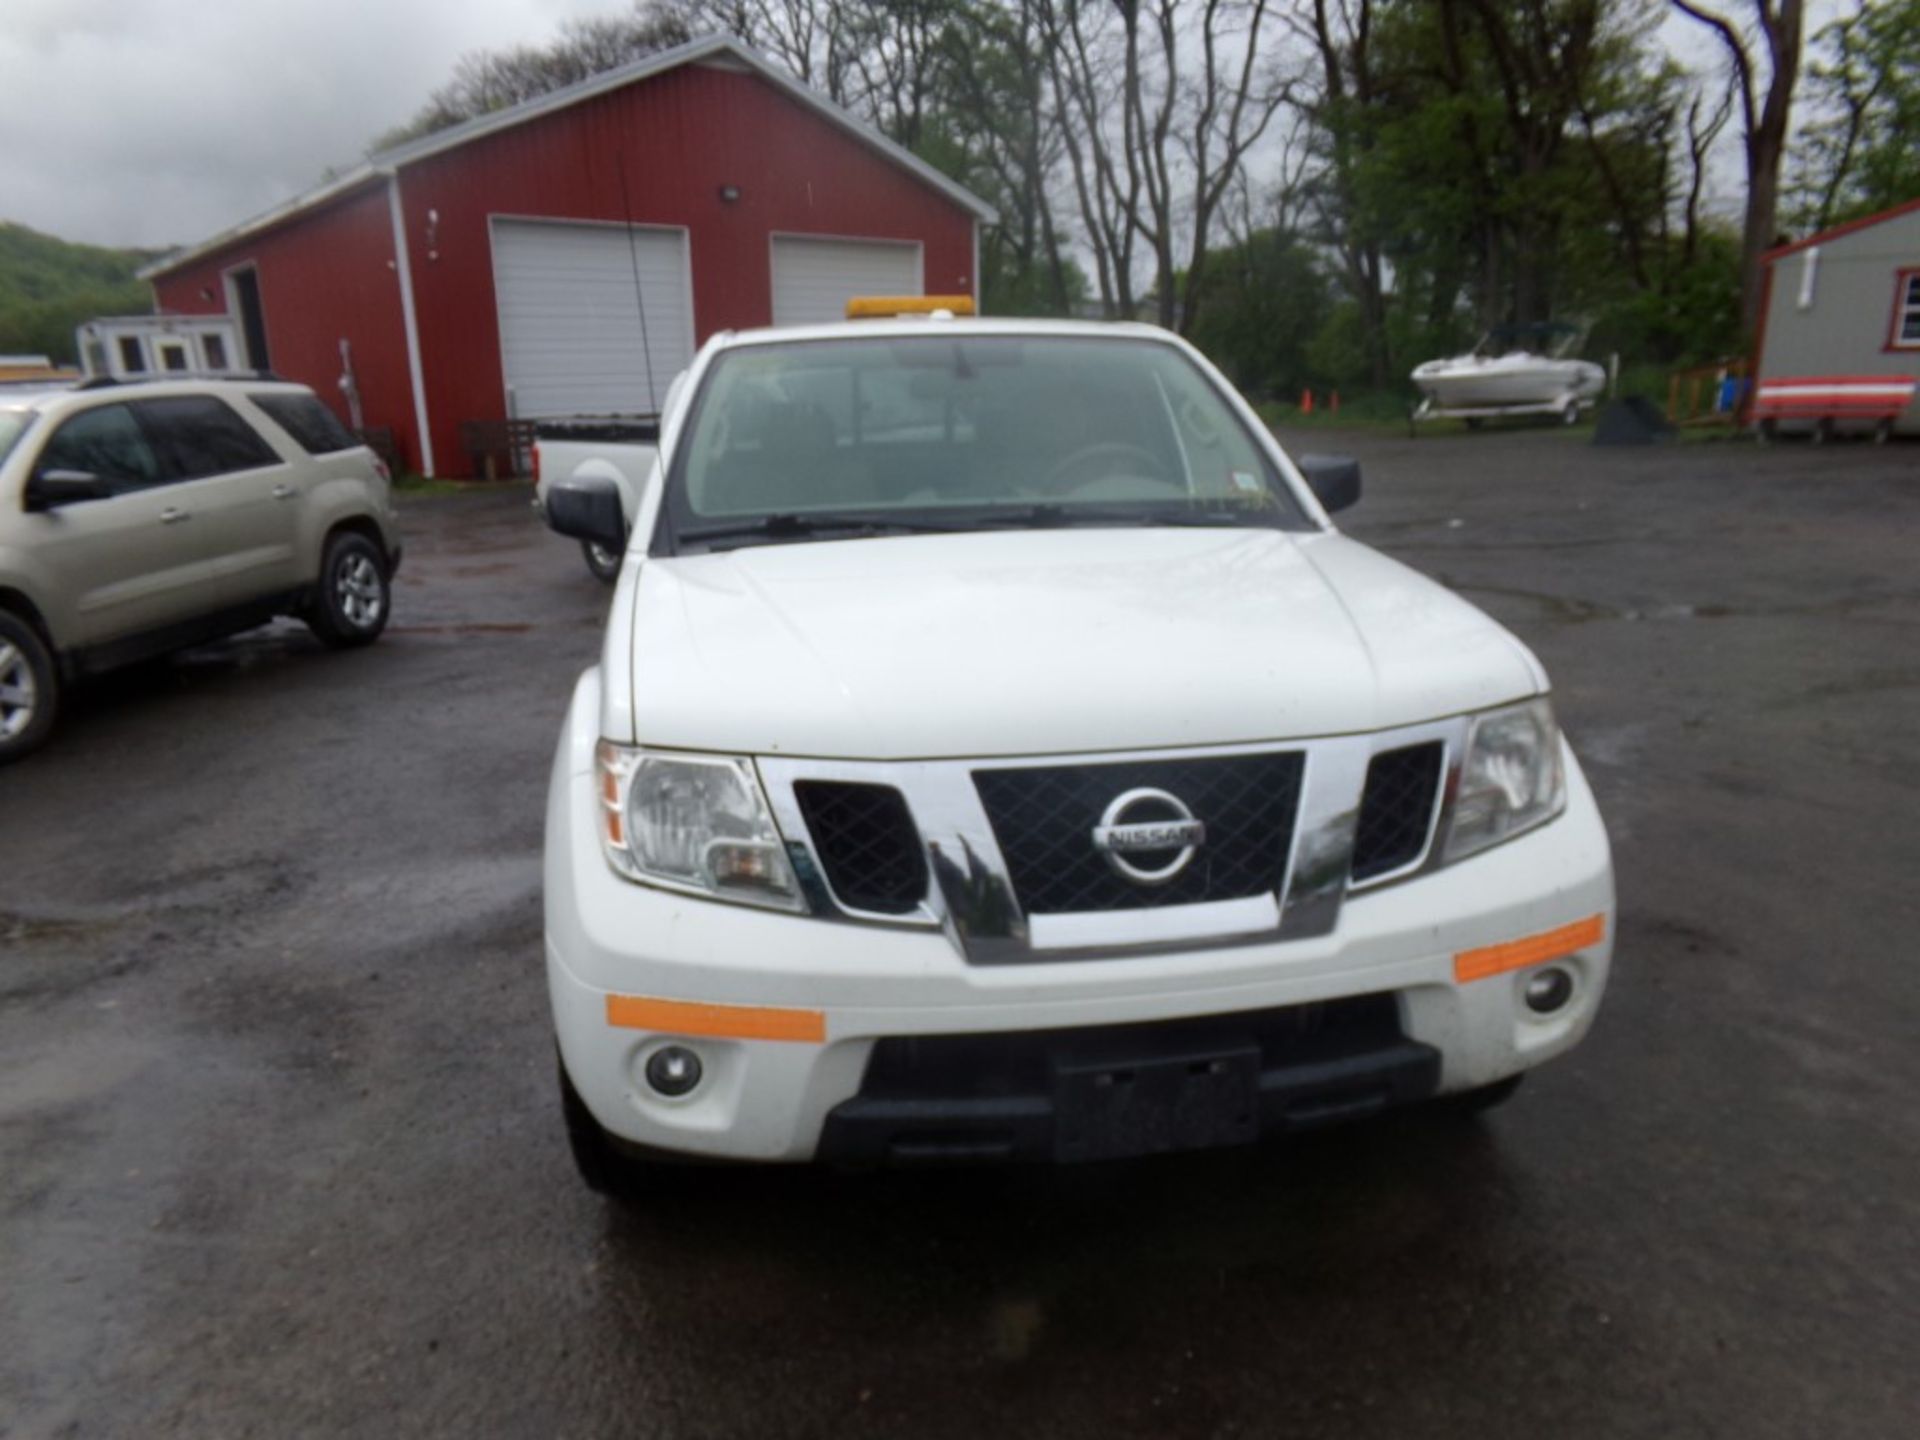 2015 Nissan Frontier 4WD Ext. Cab, 6 Cyl., Auto Trans., PW/PL, , Excellent Tires, (3) Rear Tool - Image 7 of 9